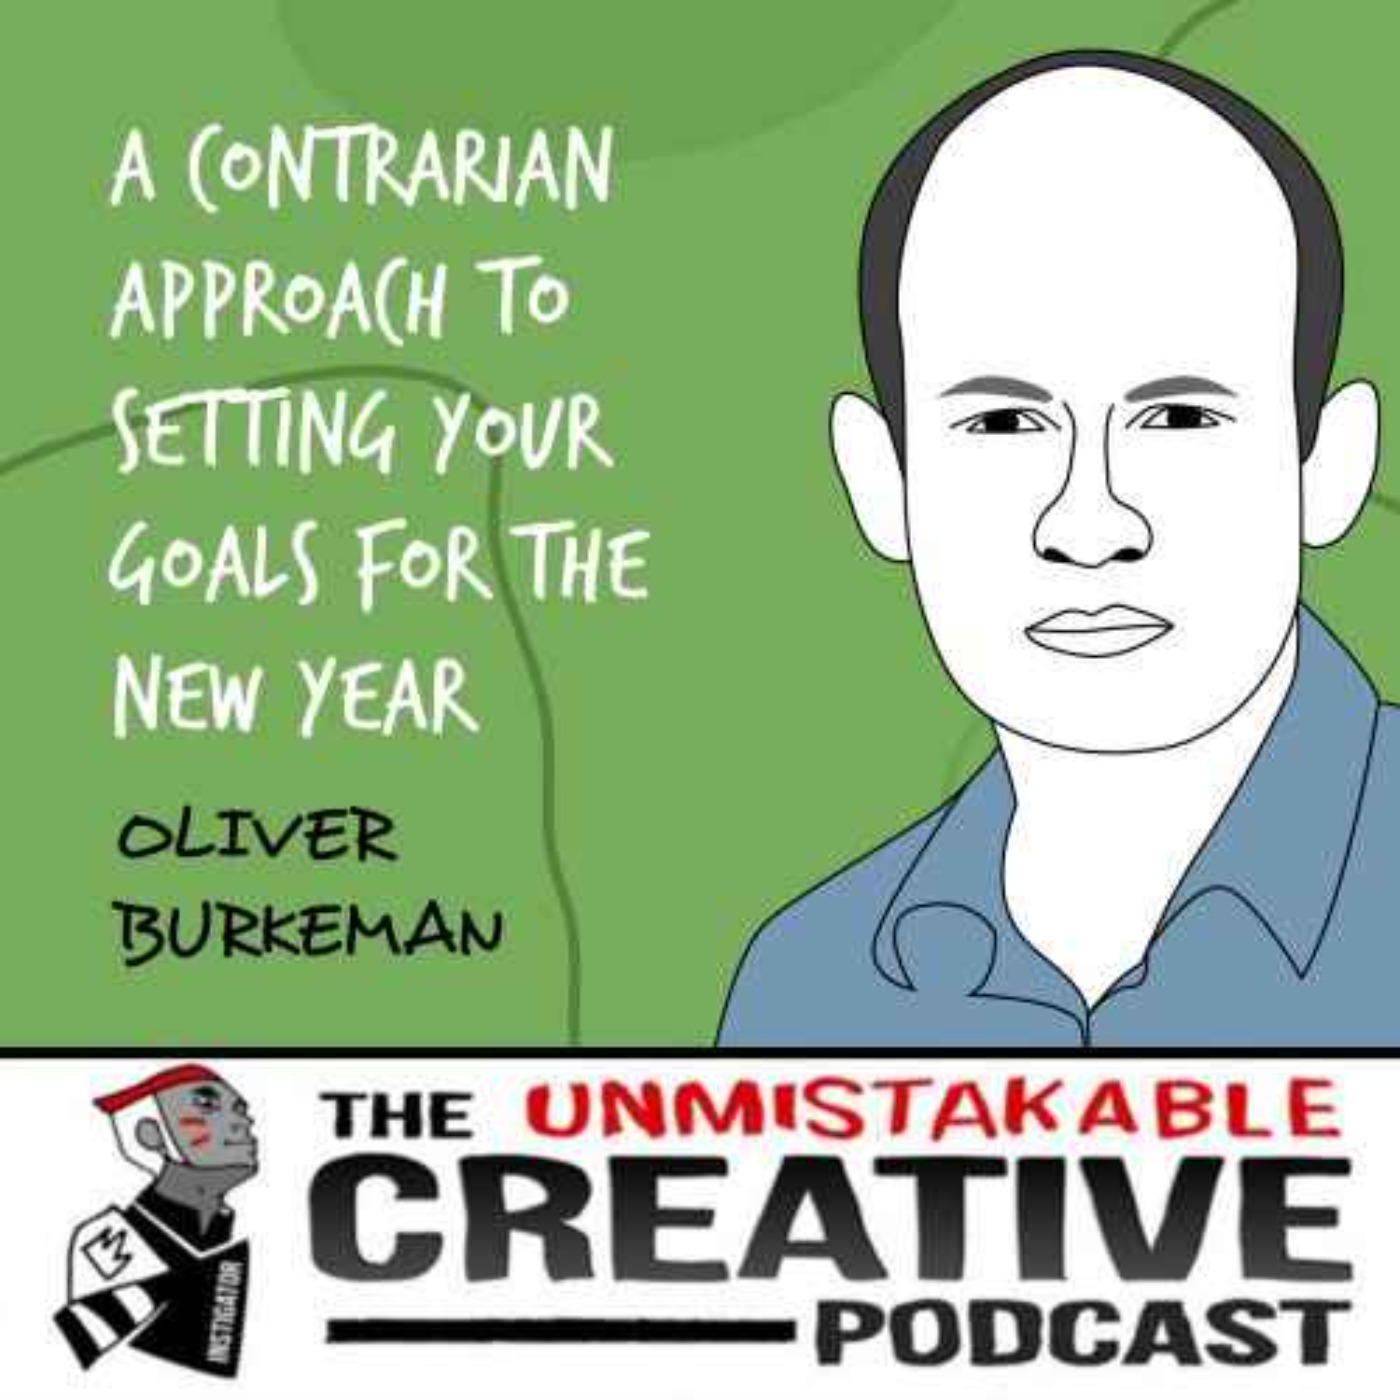 Mental Health Awareness: Oliver Burkeman | A Contrarian Approach to Setting Your Goals for the New Year